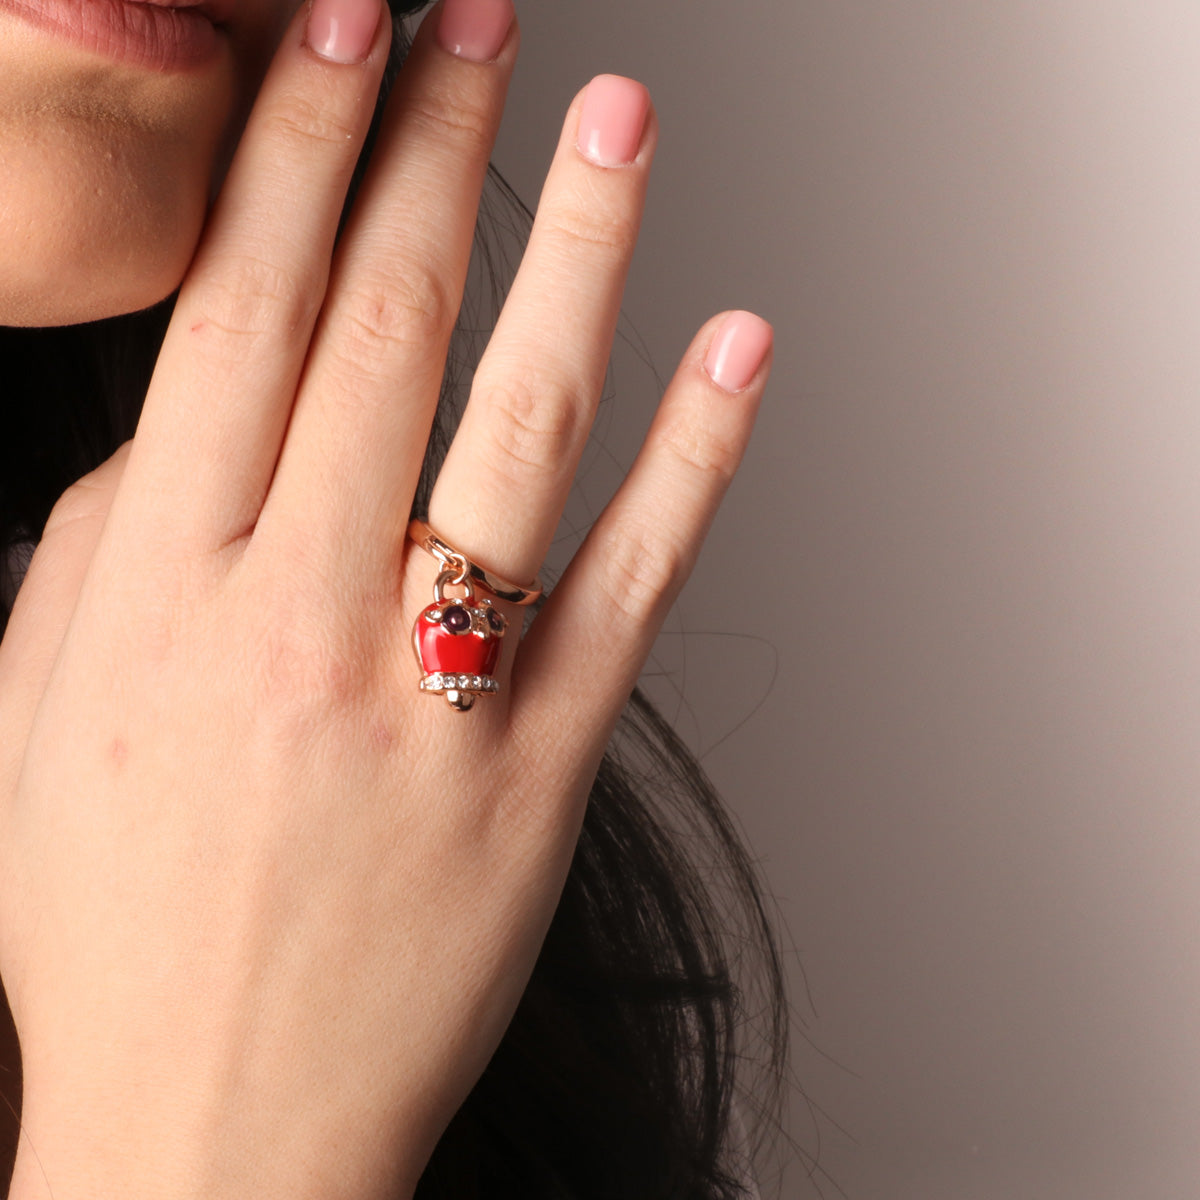 Metal ring with bille charm to owl embellished with red and black enamel and white crystals